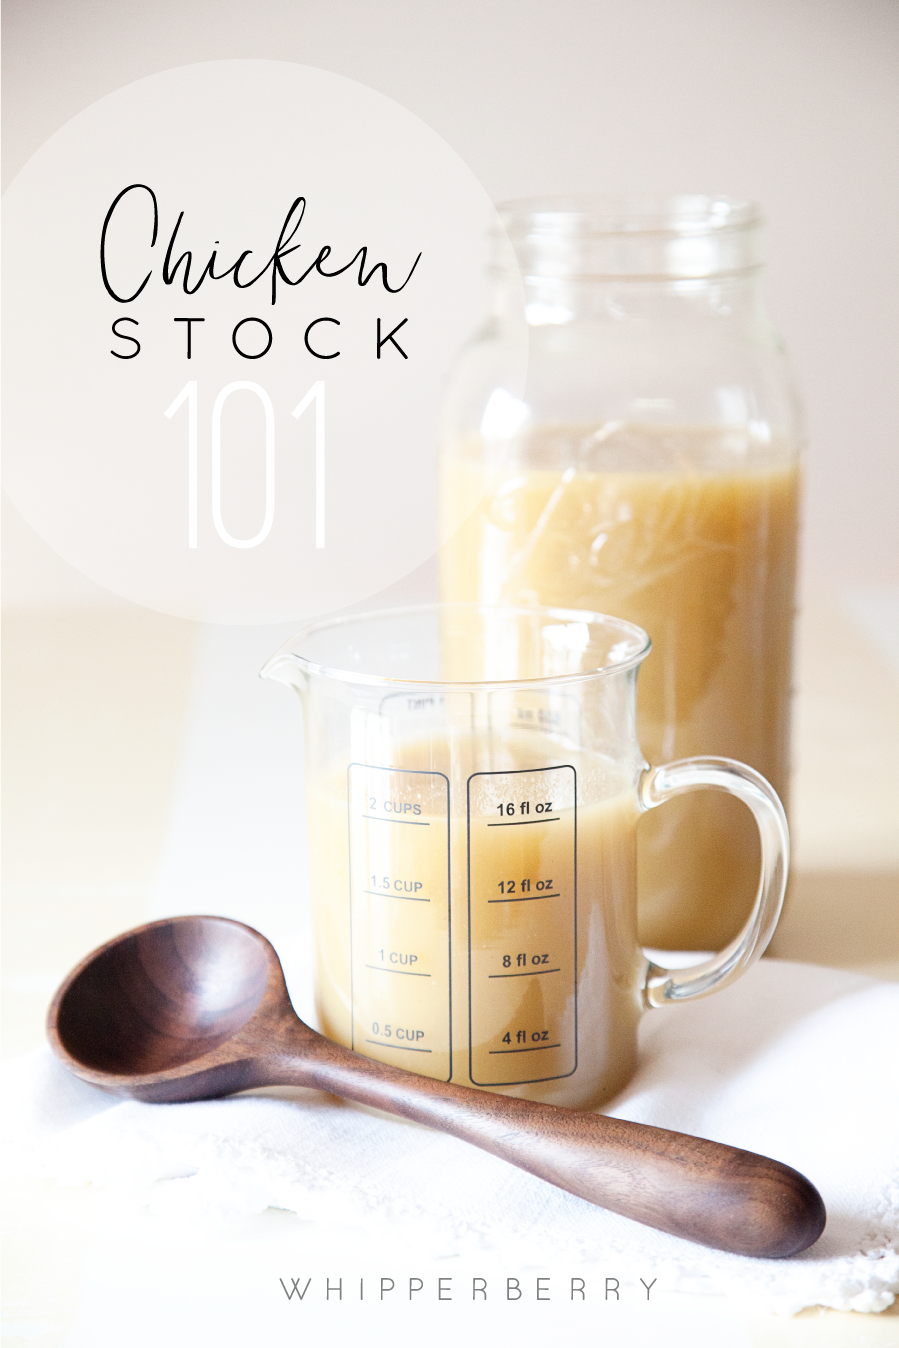 Chicken Stock 101 - Come learn how to make liquid gold the base for the best soups and stews from WhipperBerry